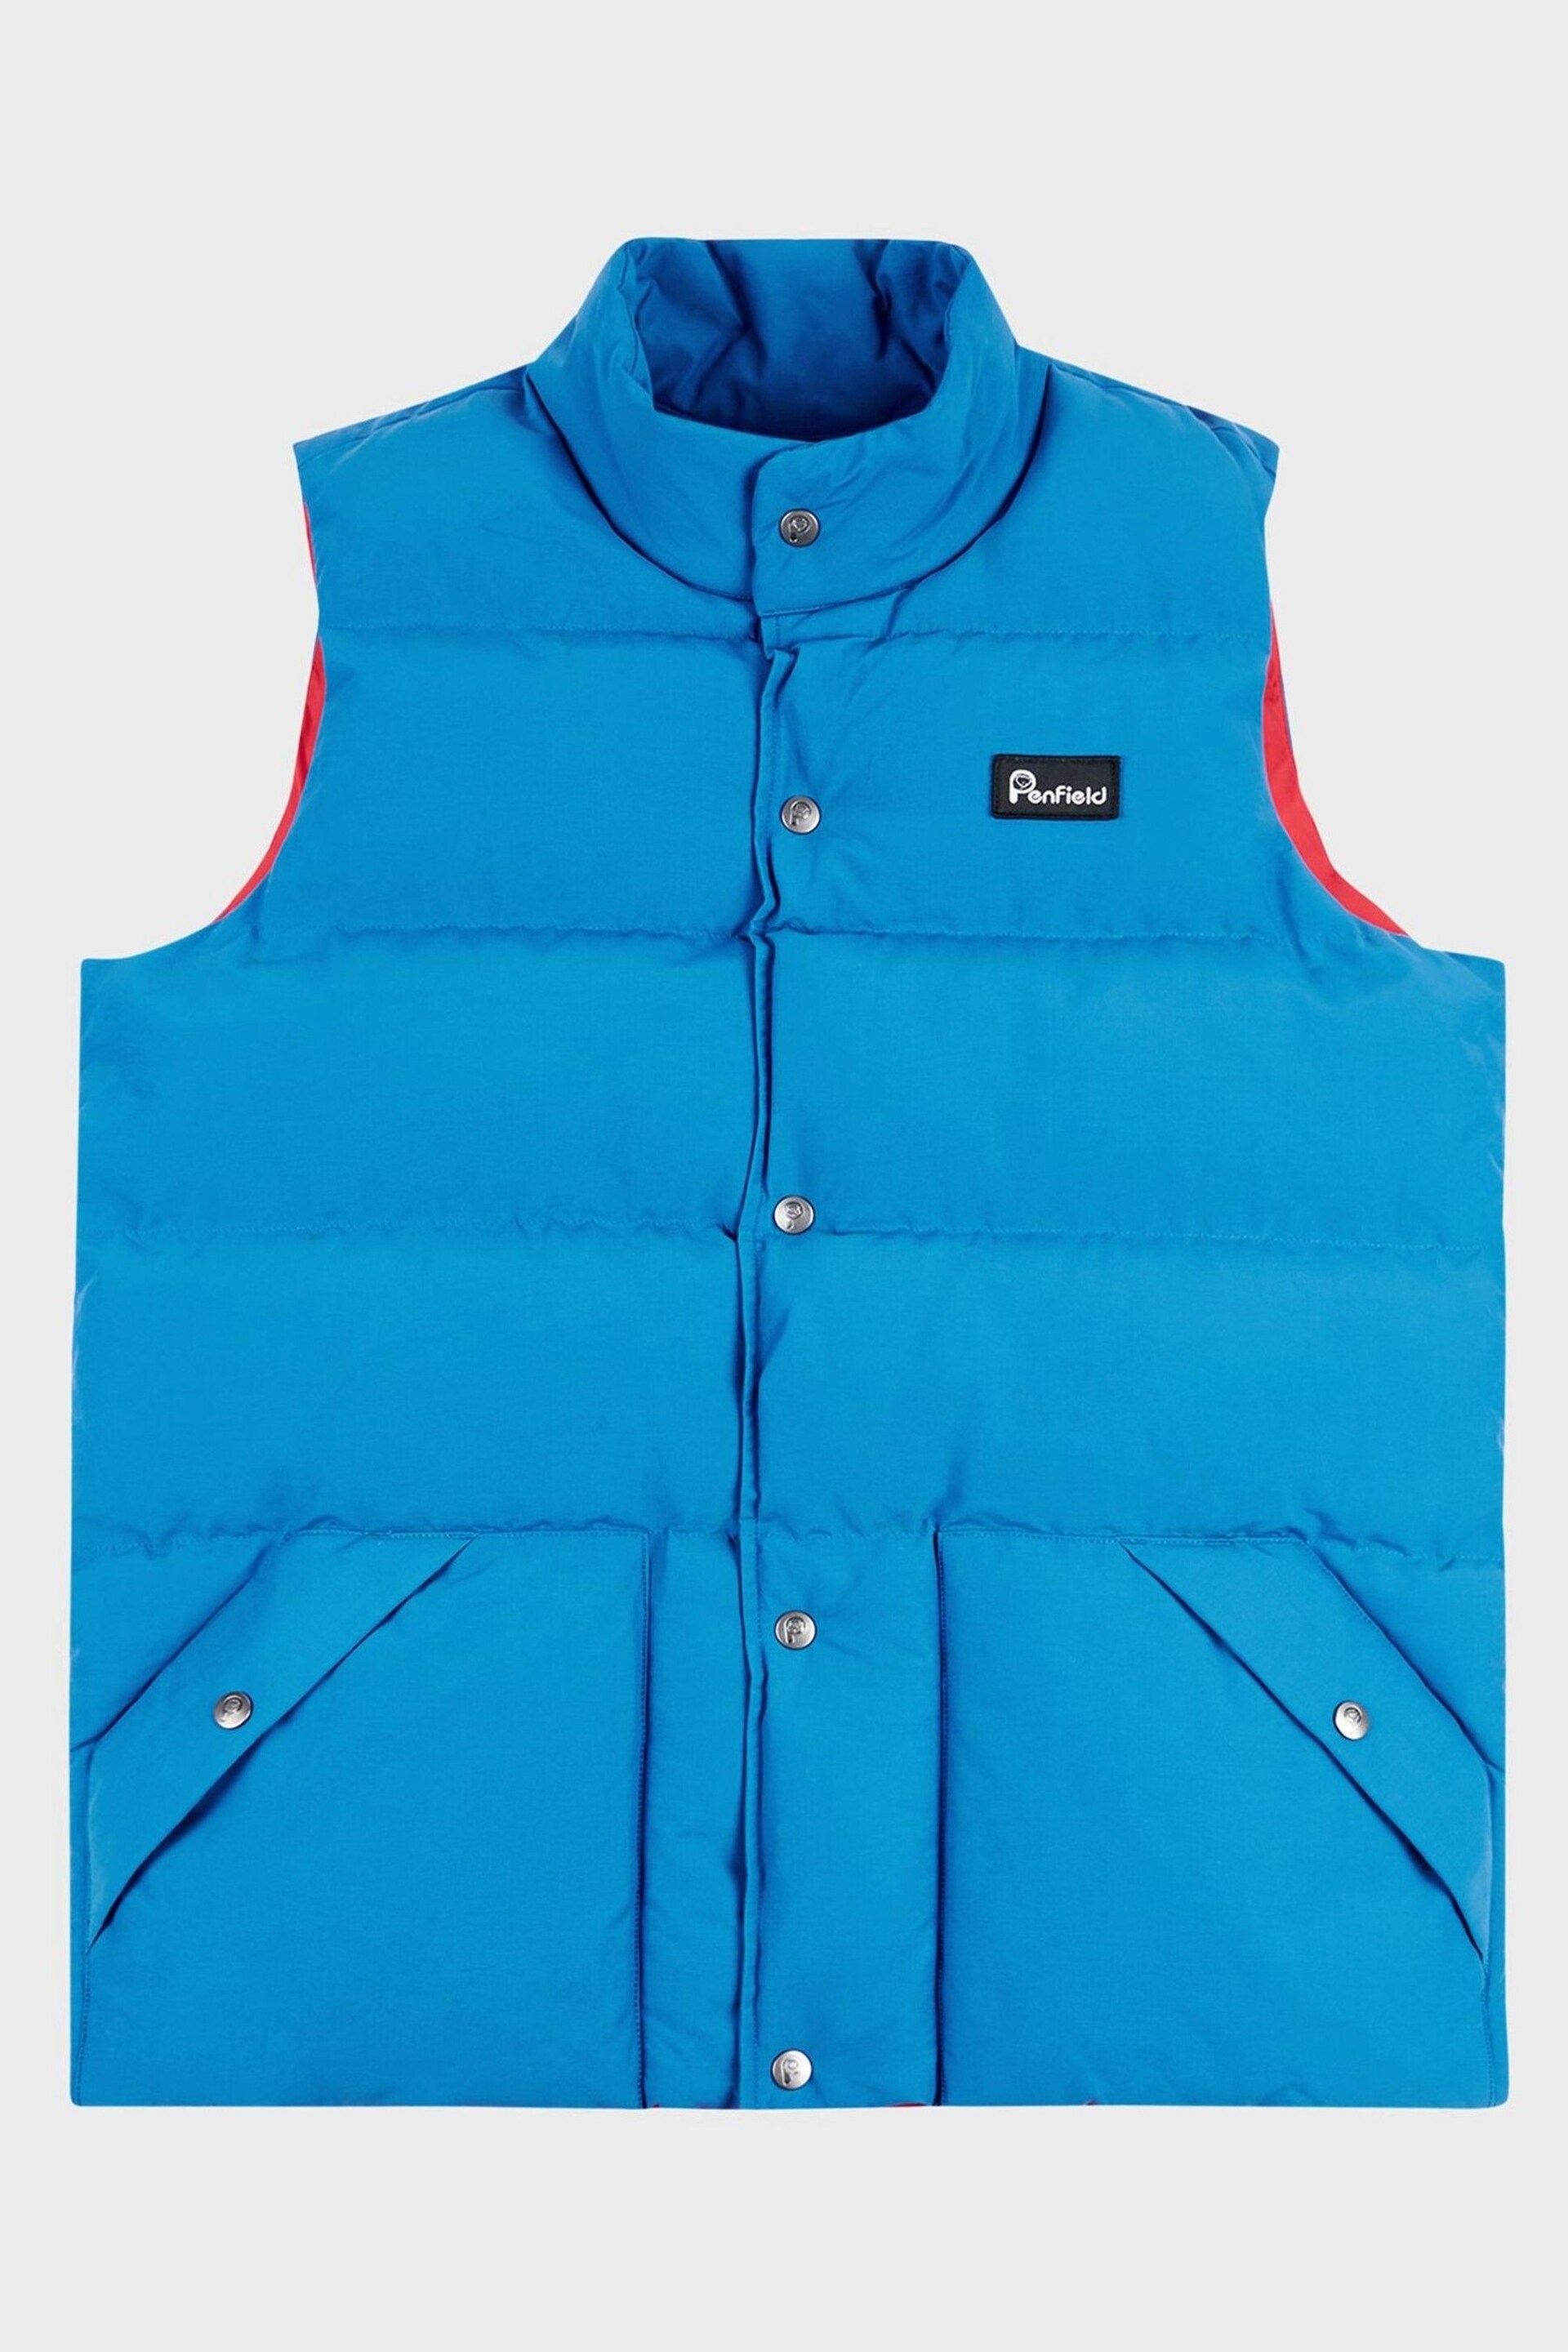 Penfield Blue Outback Gilet - Image 7 of 9